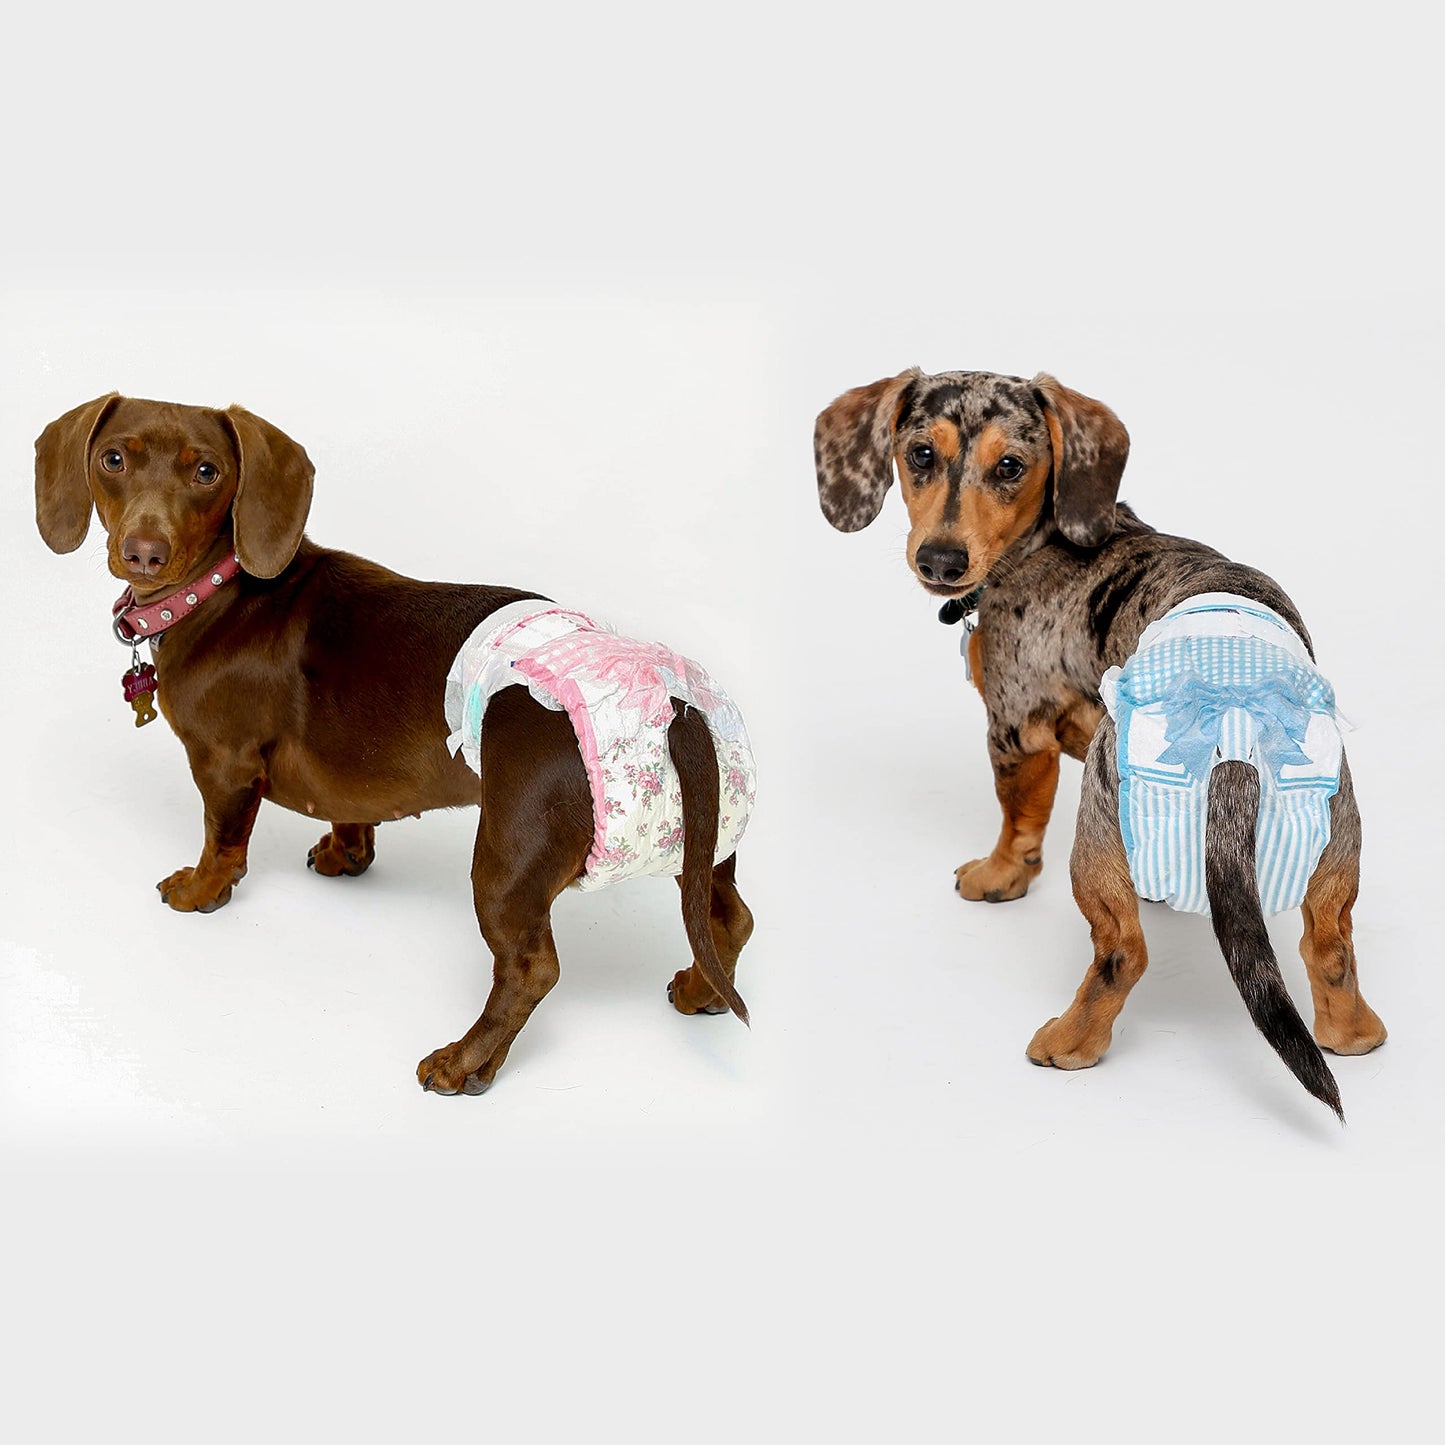 Hartz Disposable Dog Diapers, Size S 36 count, Comfortable & Secure Fit, Easy to Put On